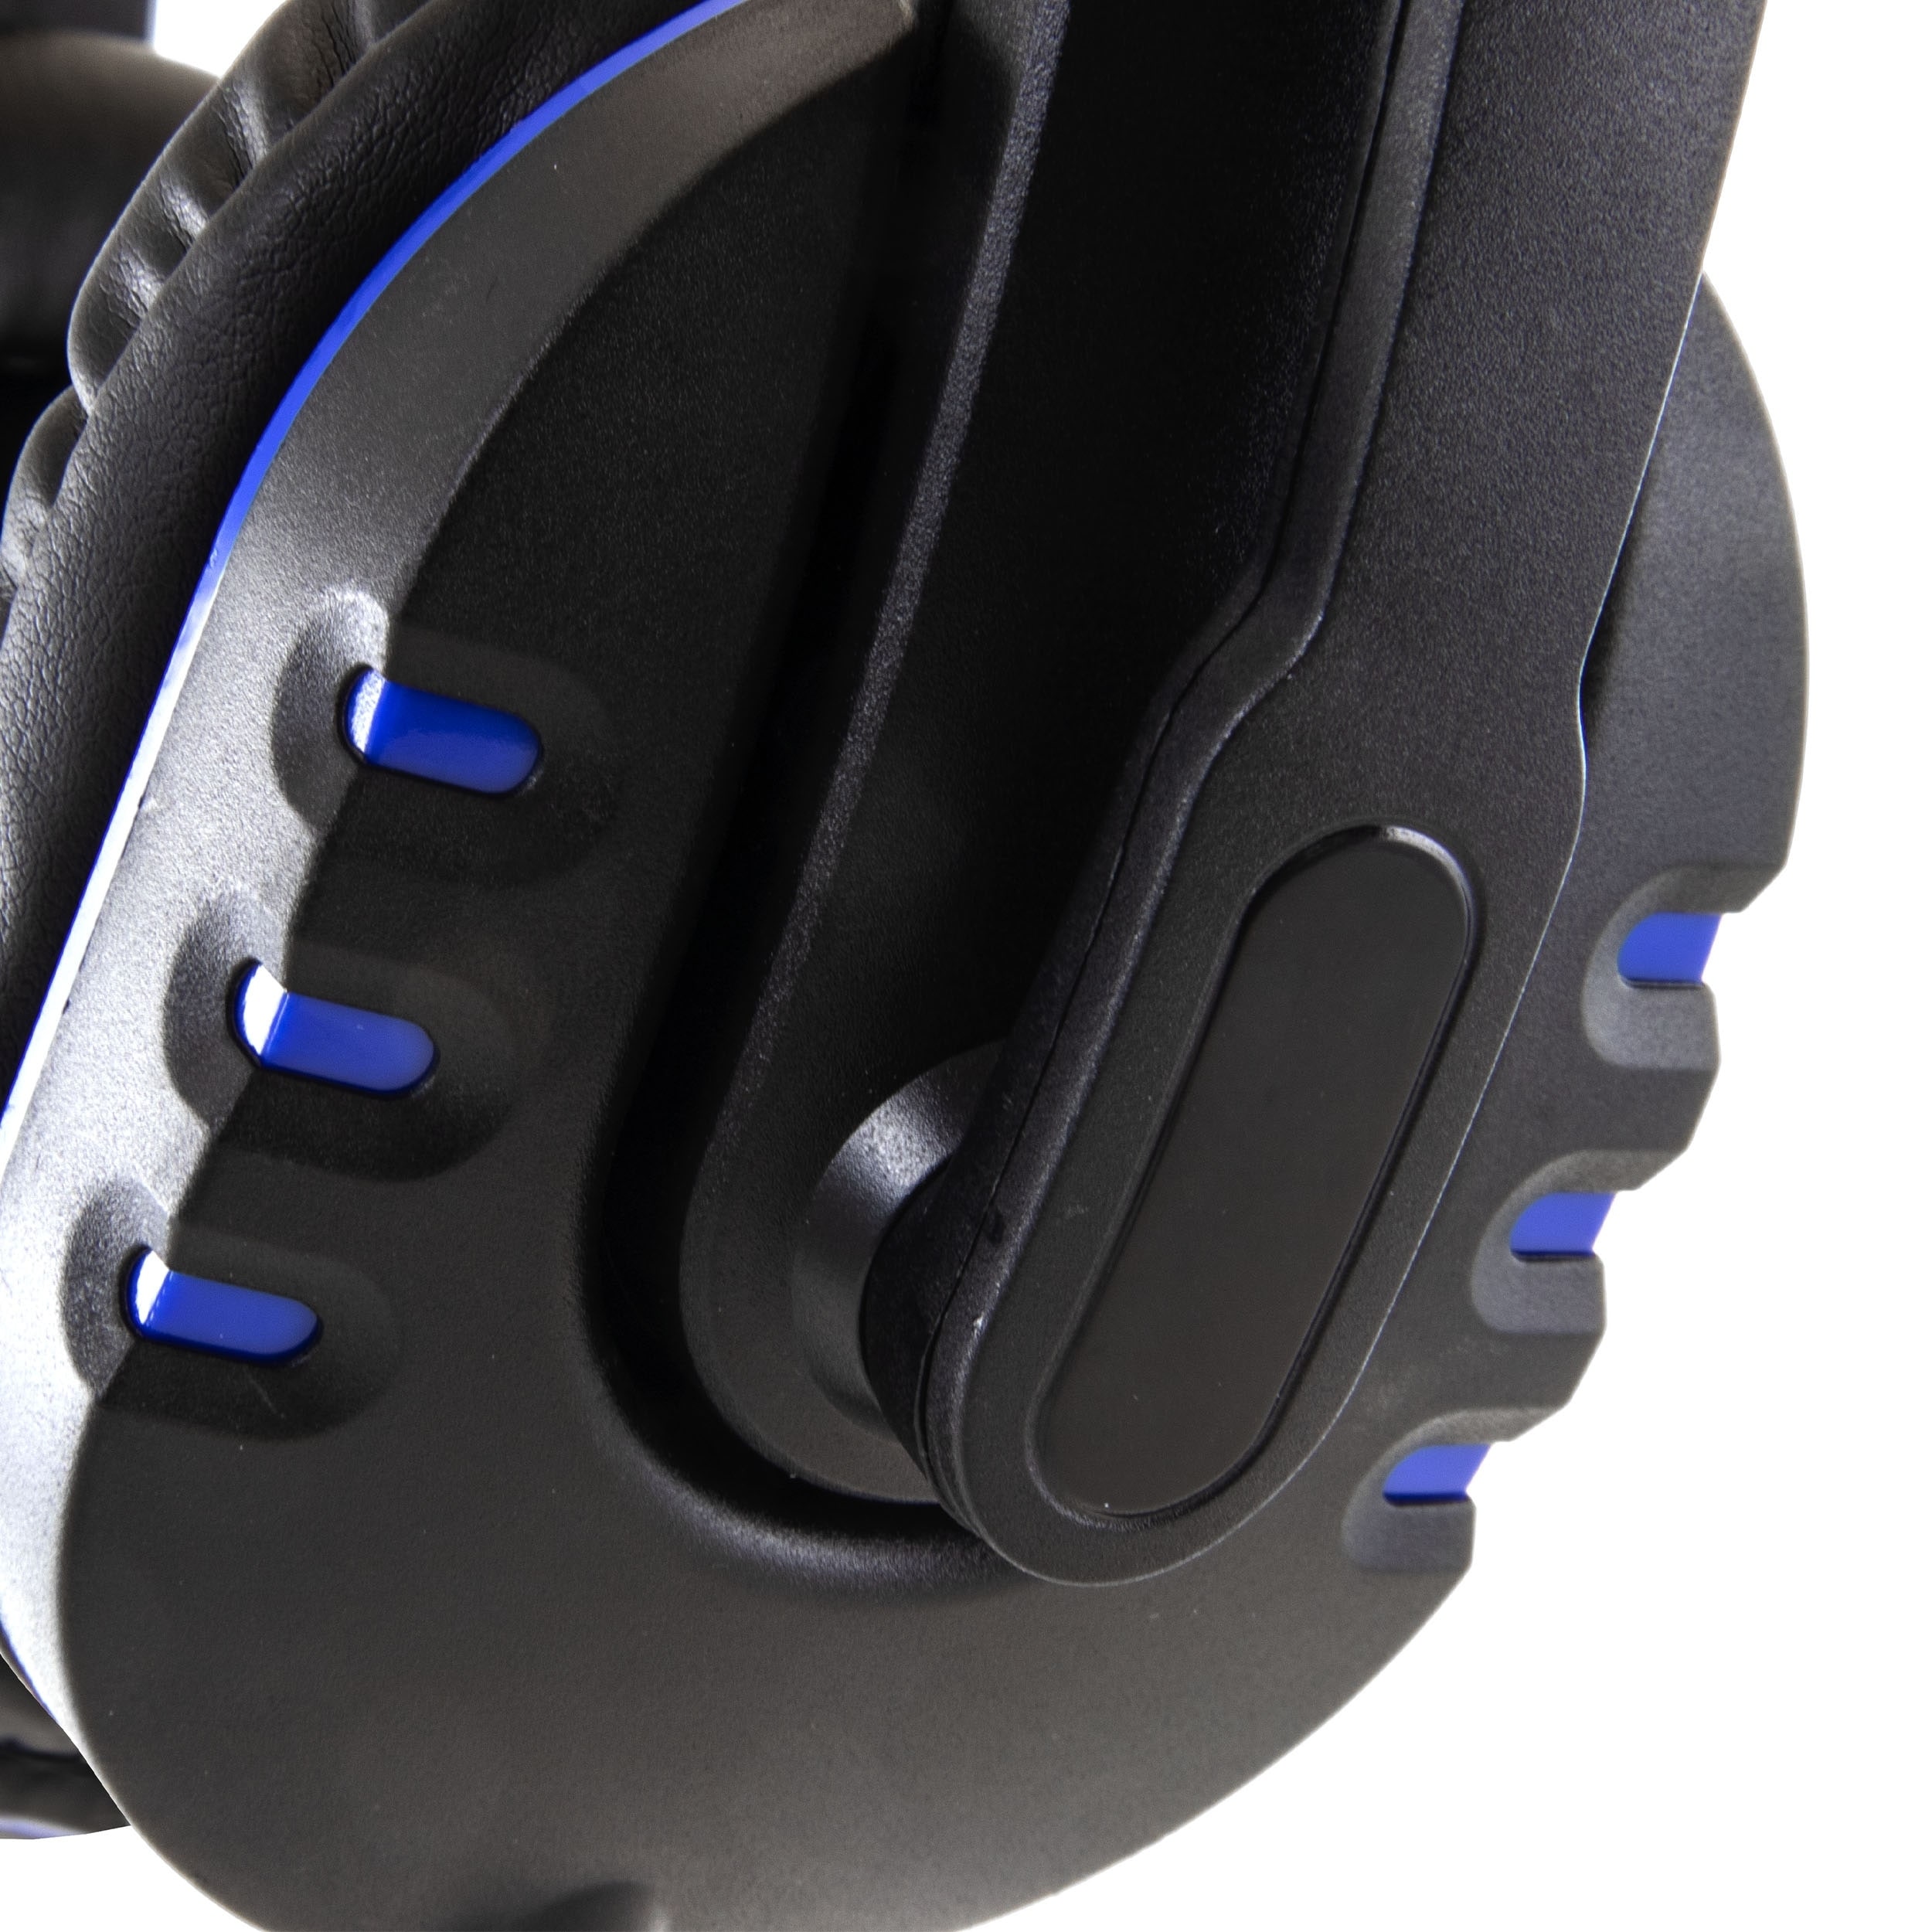 kmd gaming headset ps4